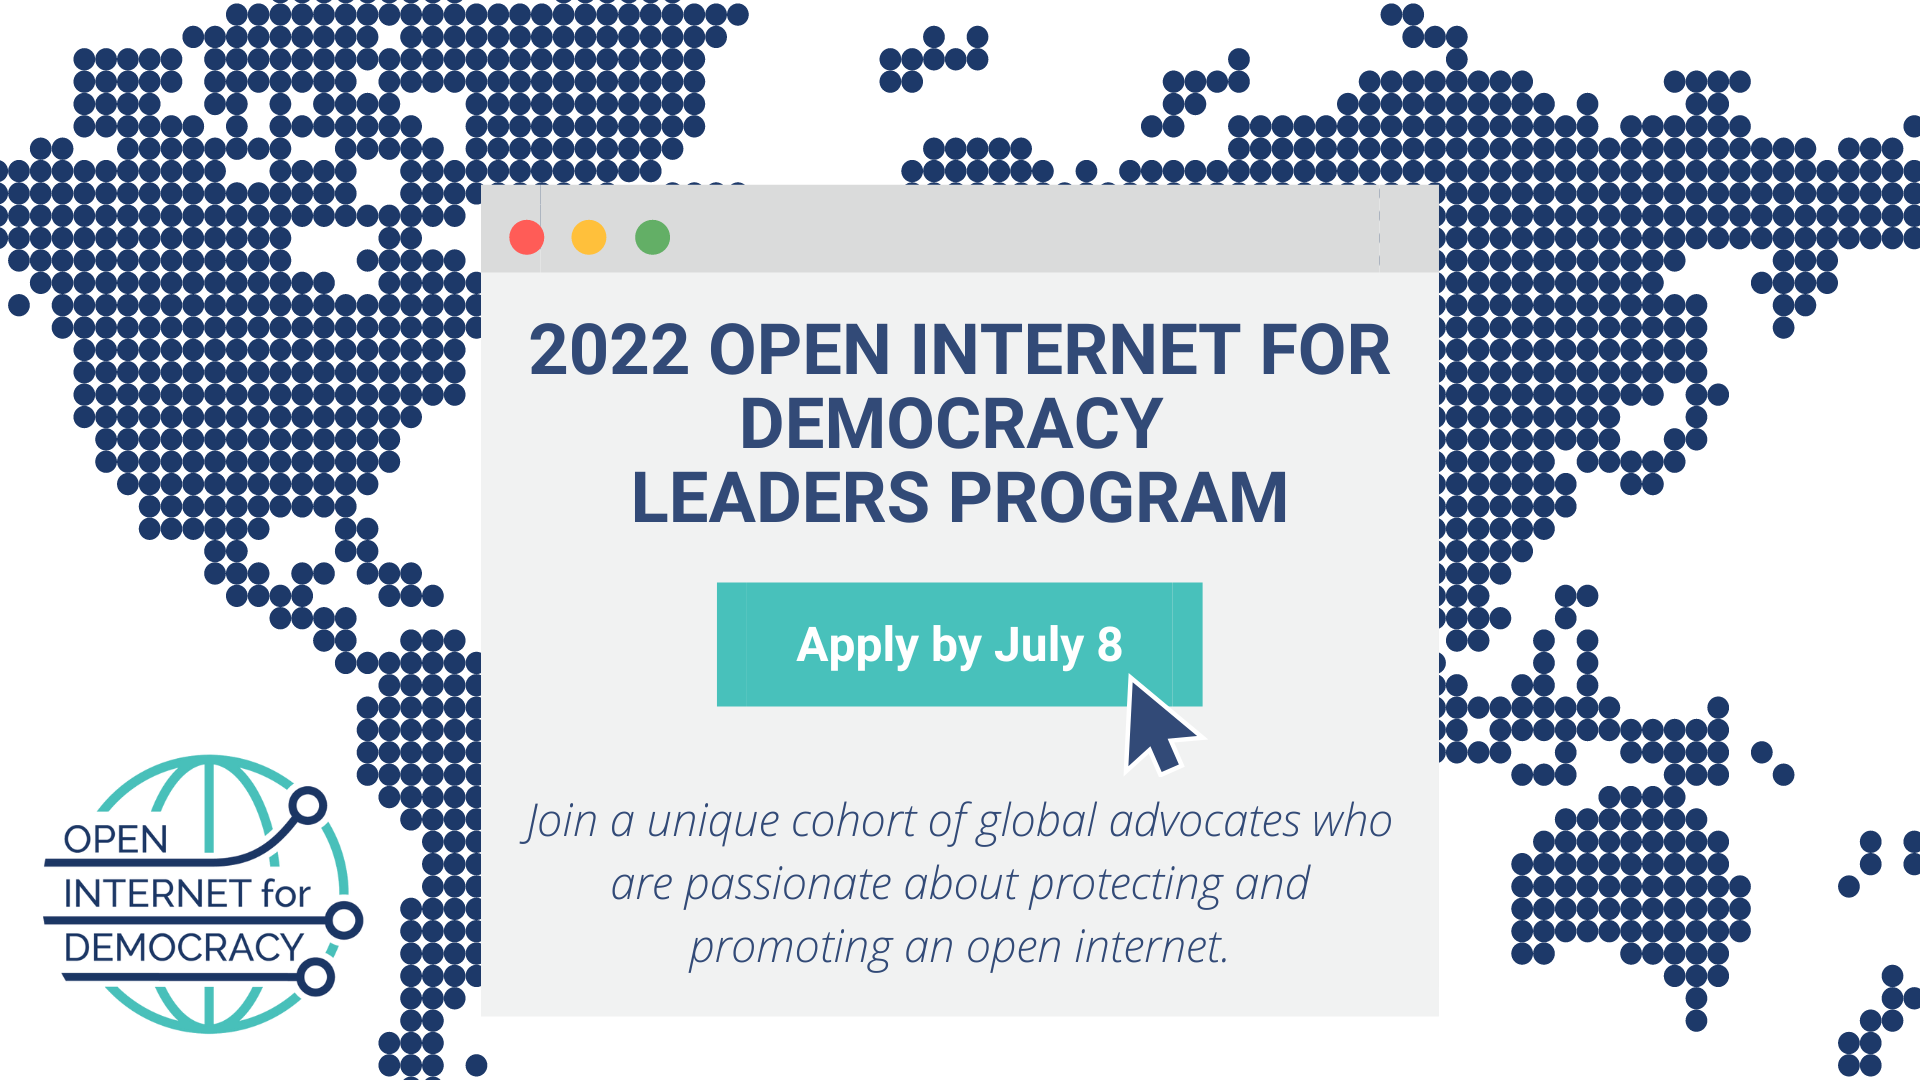 graphic announcing that applications are open for the leader's program until July 8, 2022